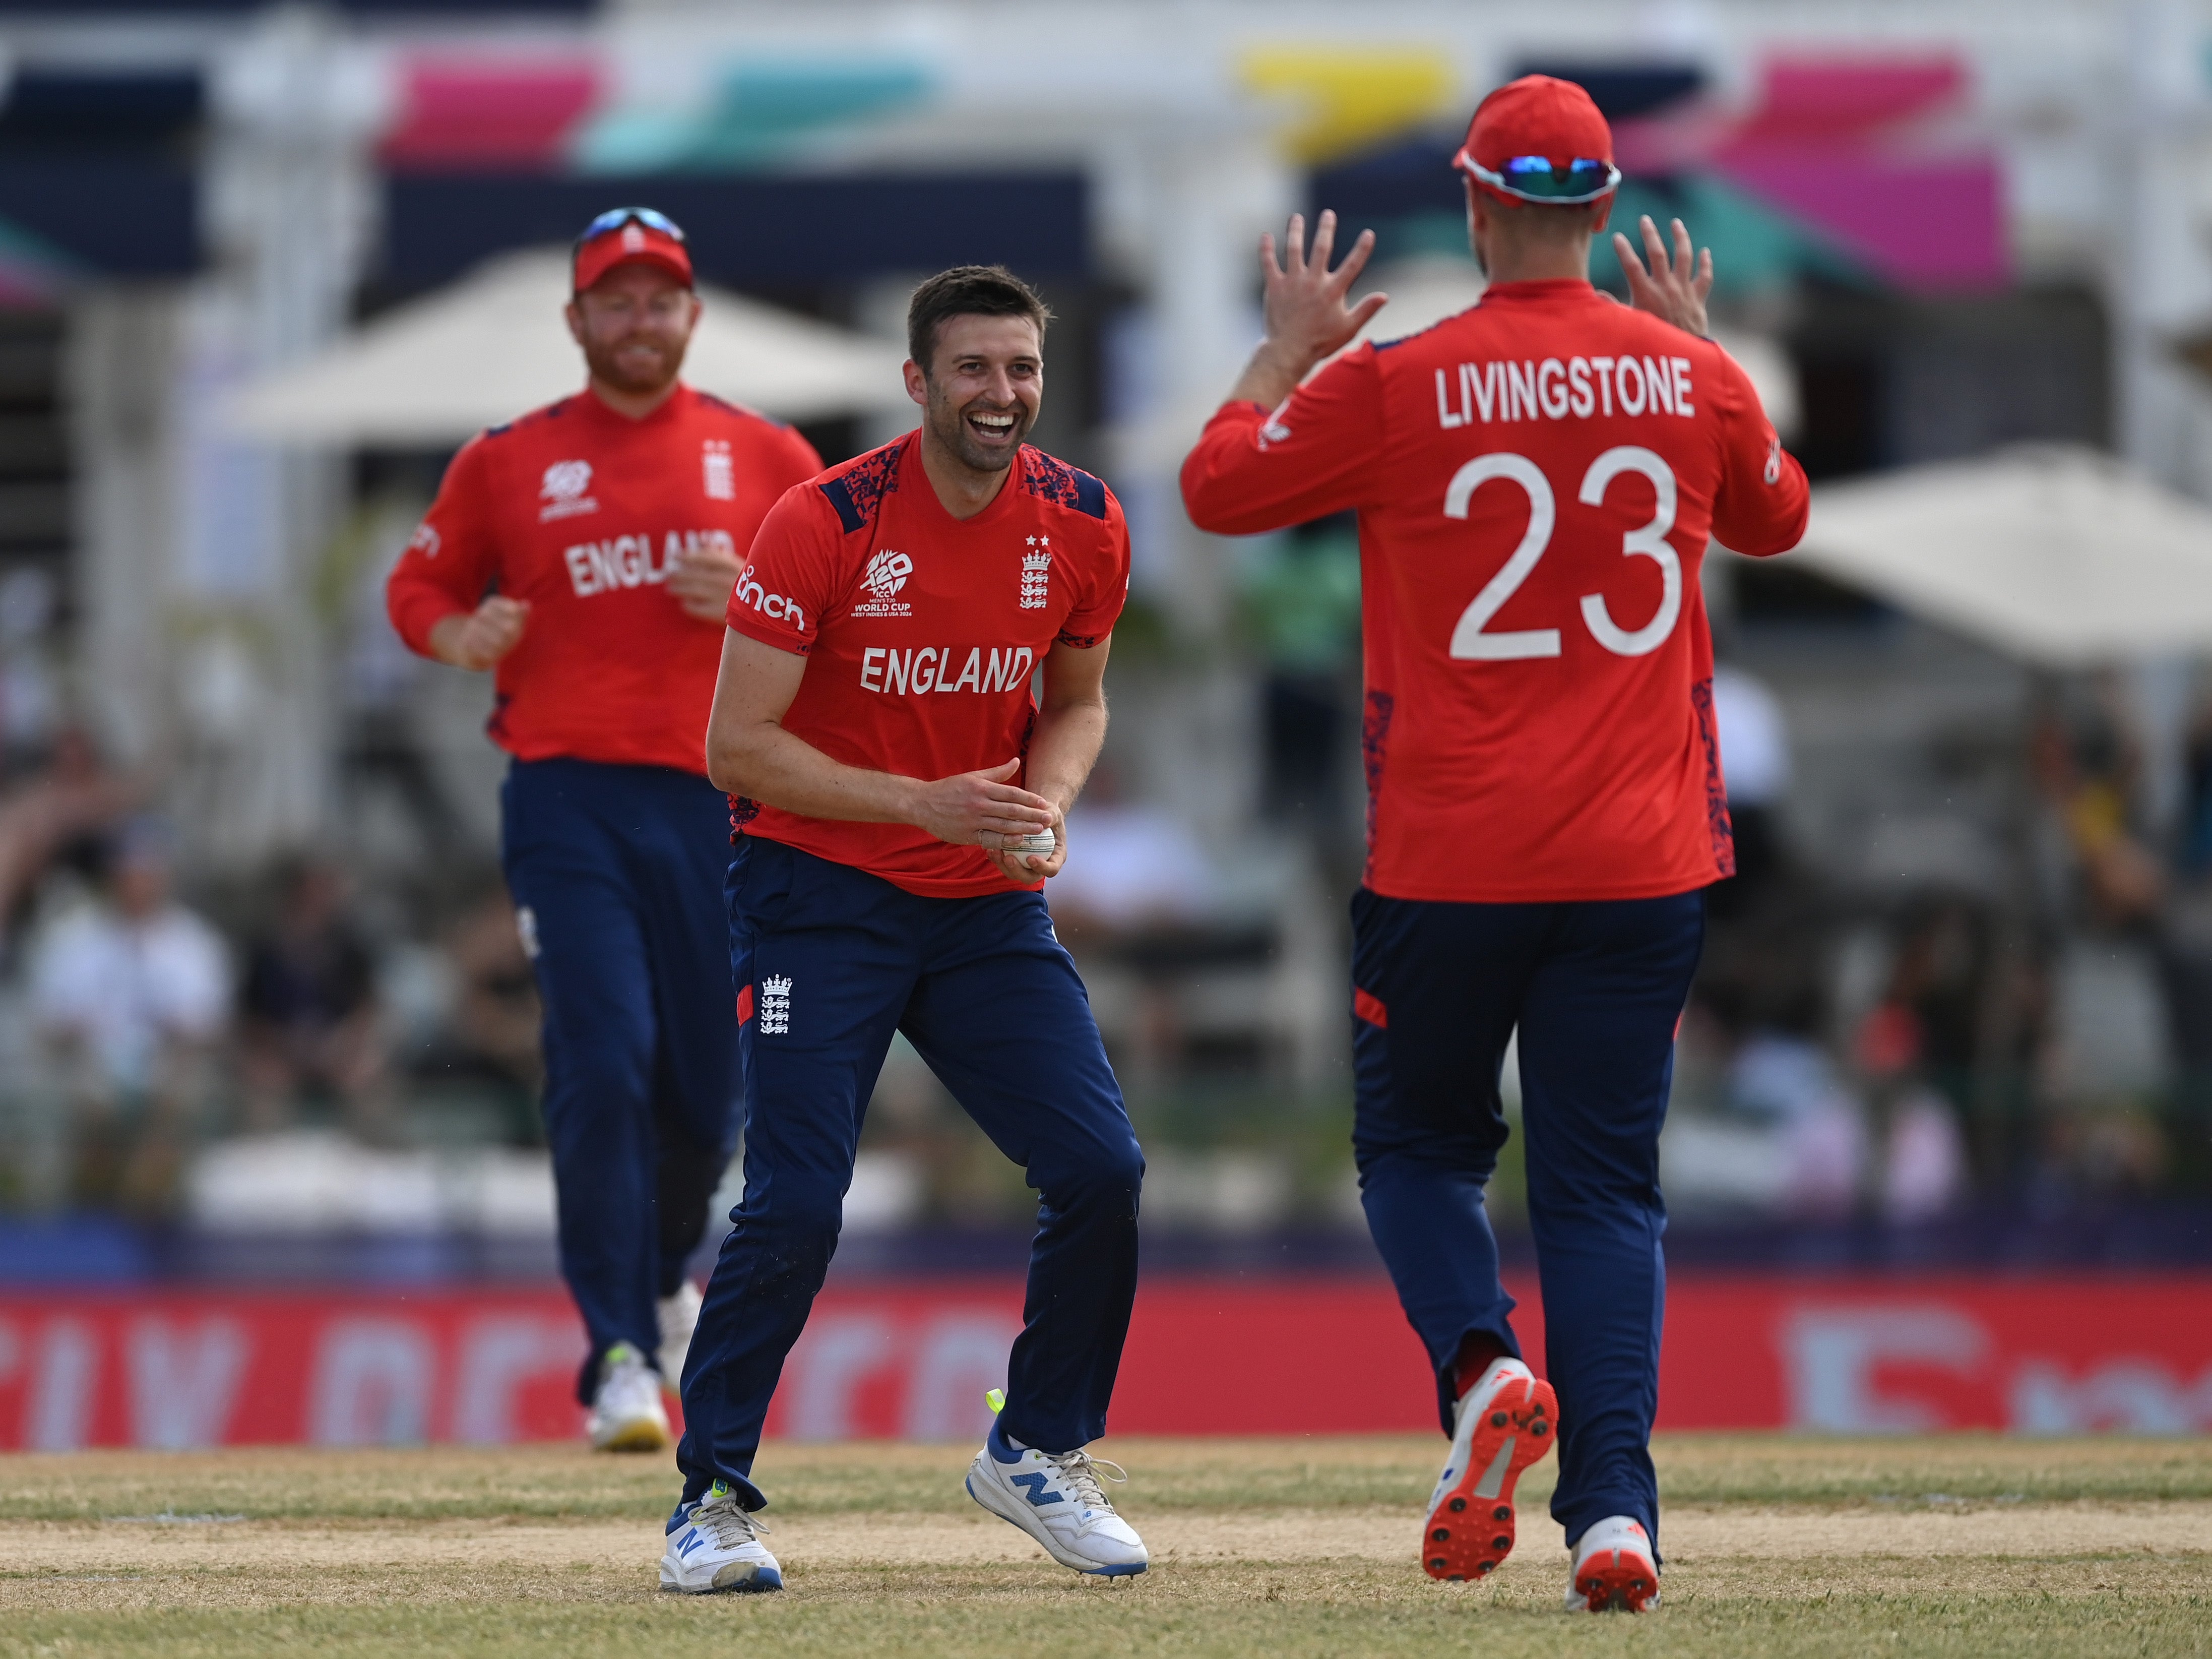 Mark Wood helped England dismiss Oman for just 47